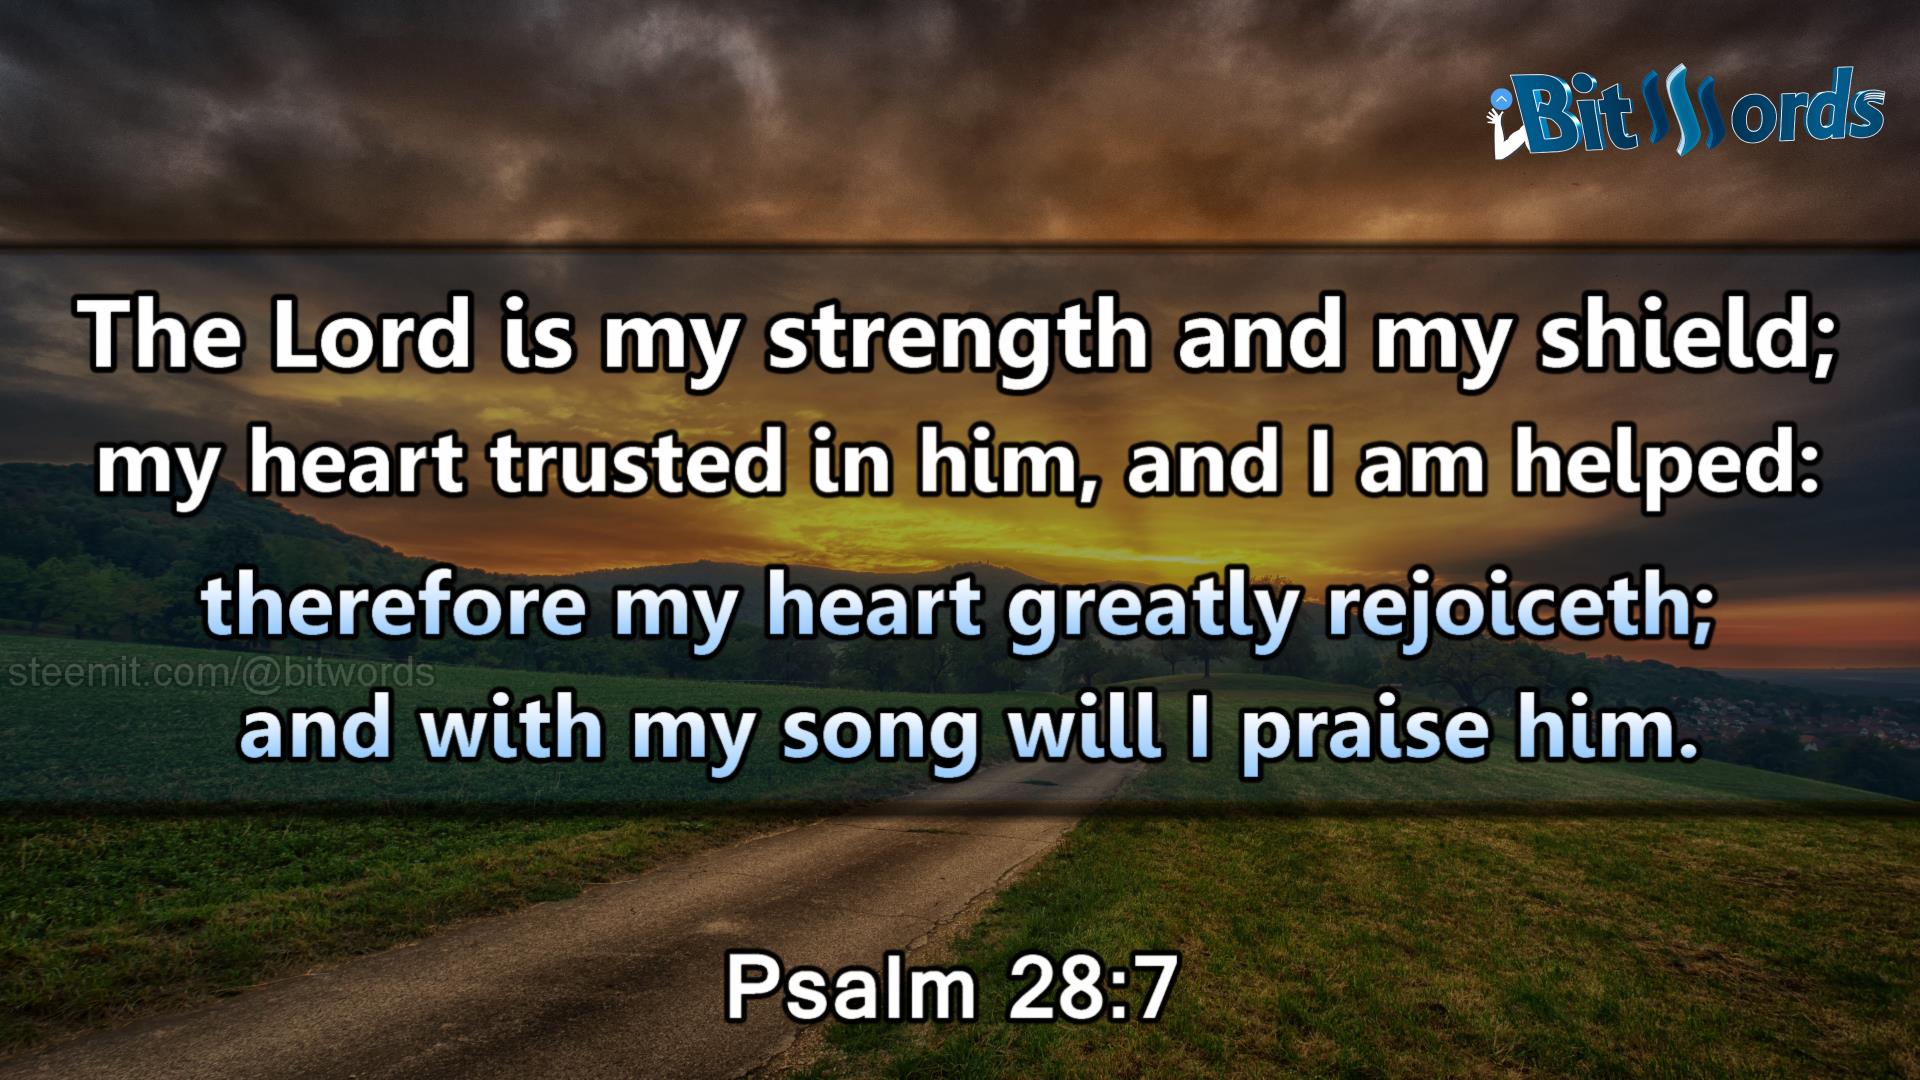 bitwords steemit bible verse of fthe day The Lord is my strength and my shield; my heart trusted in him, and I am helped therefore my heart greatly rejoiceth; and with my song will I praise him.Psalm 28 7.jpg